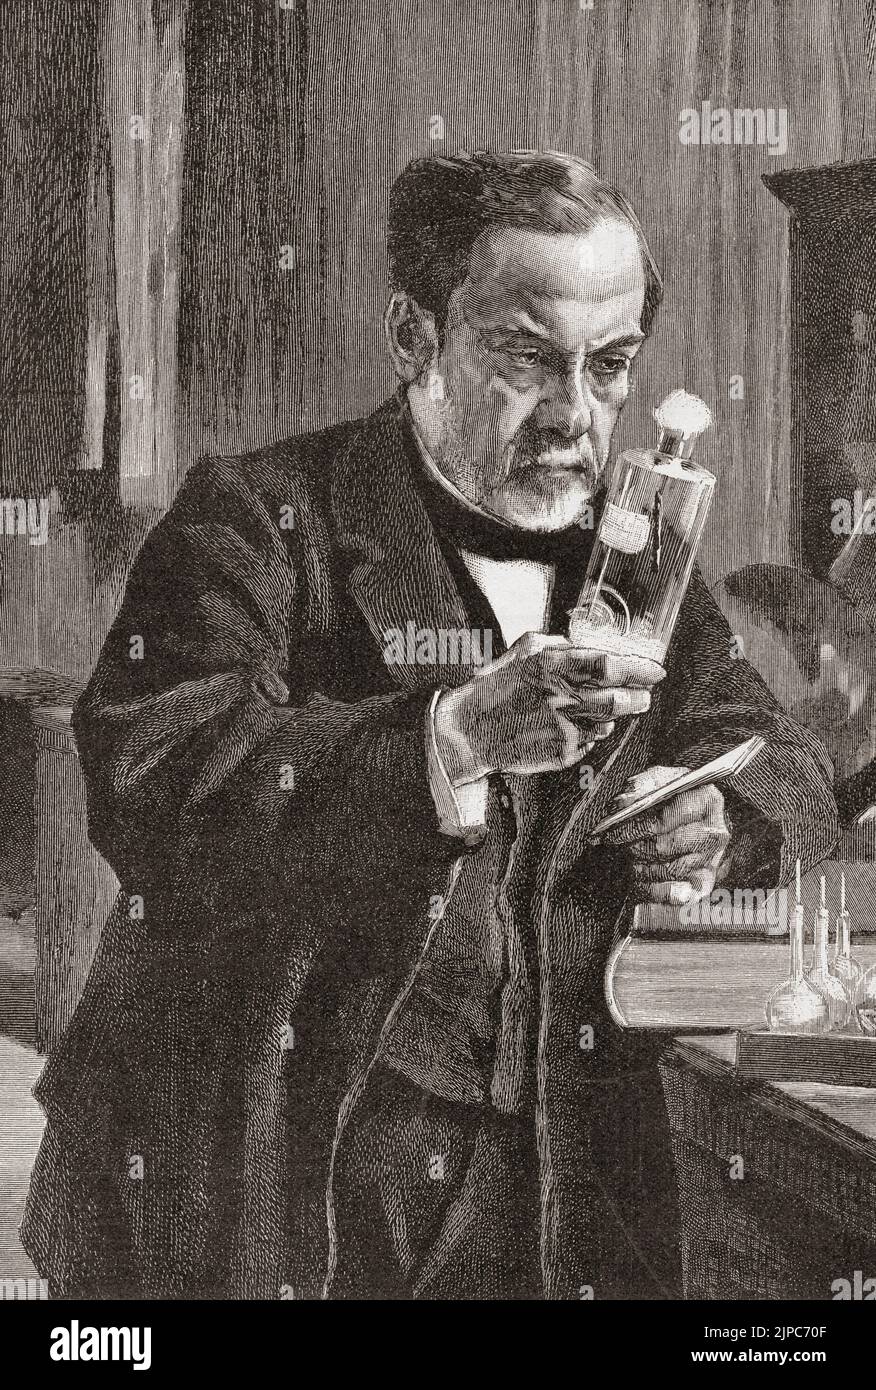 Louis Pasteur in his laboratory.  Louis Pasteur, 1822 - 1895.  French chemist and microbioligist who discovered, amongst other things, pasteurization and the principlies of vaccination.  He was also an early modern proponent of the germ theory of diseases.  After an illustration in an 1893 edition of Frank Leslie's Illustrated Newspaper. Stock Photo